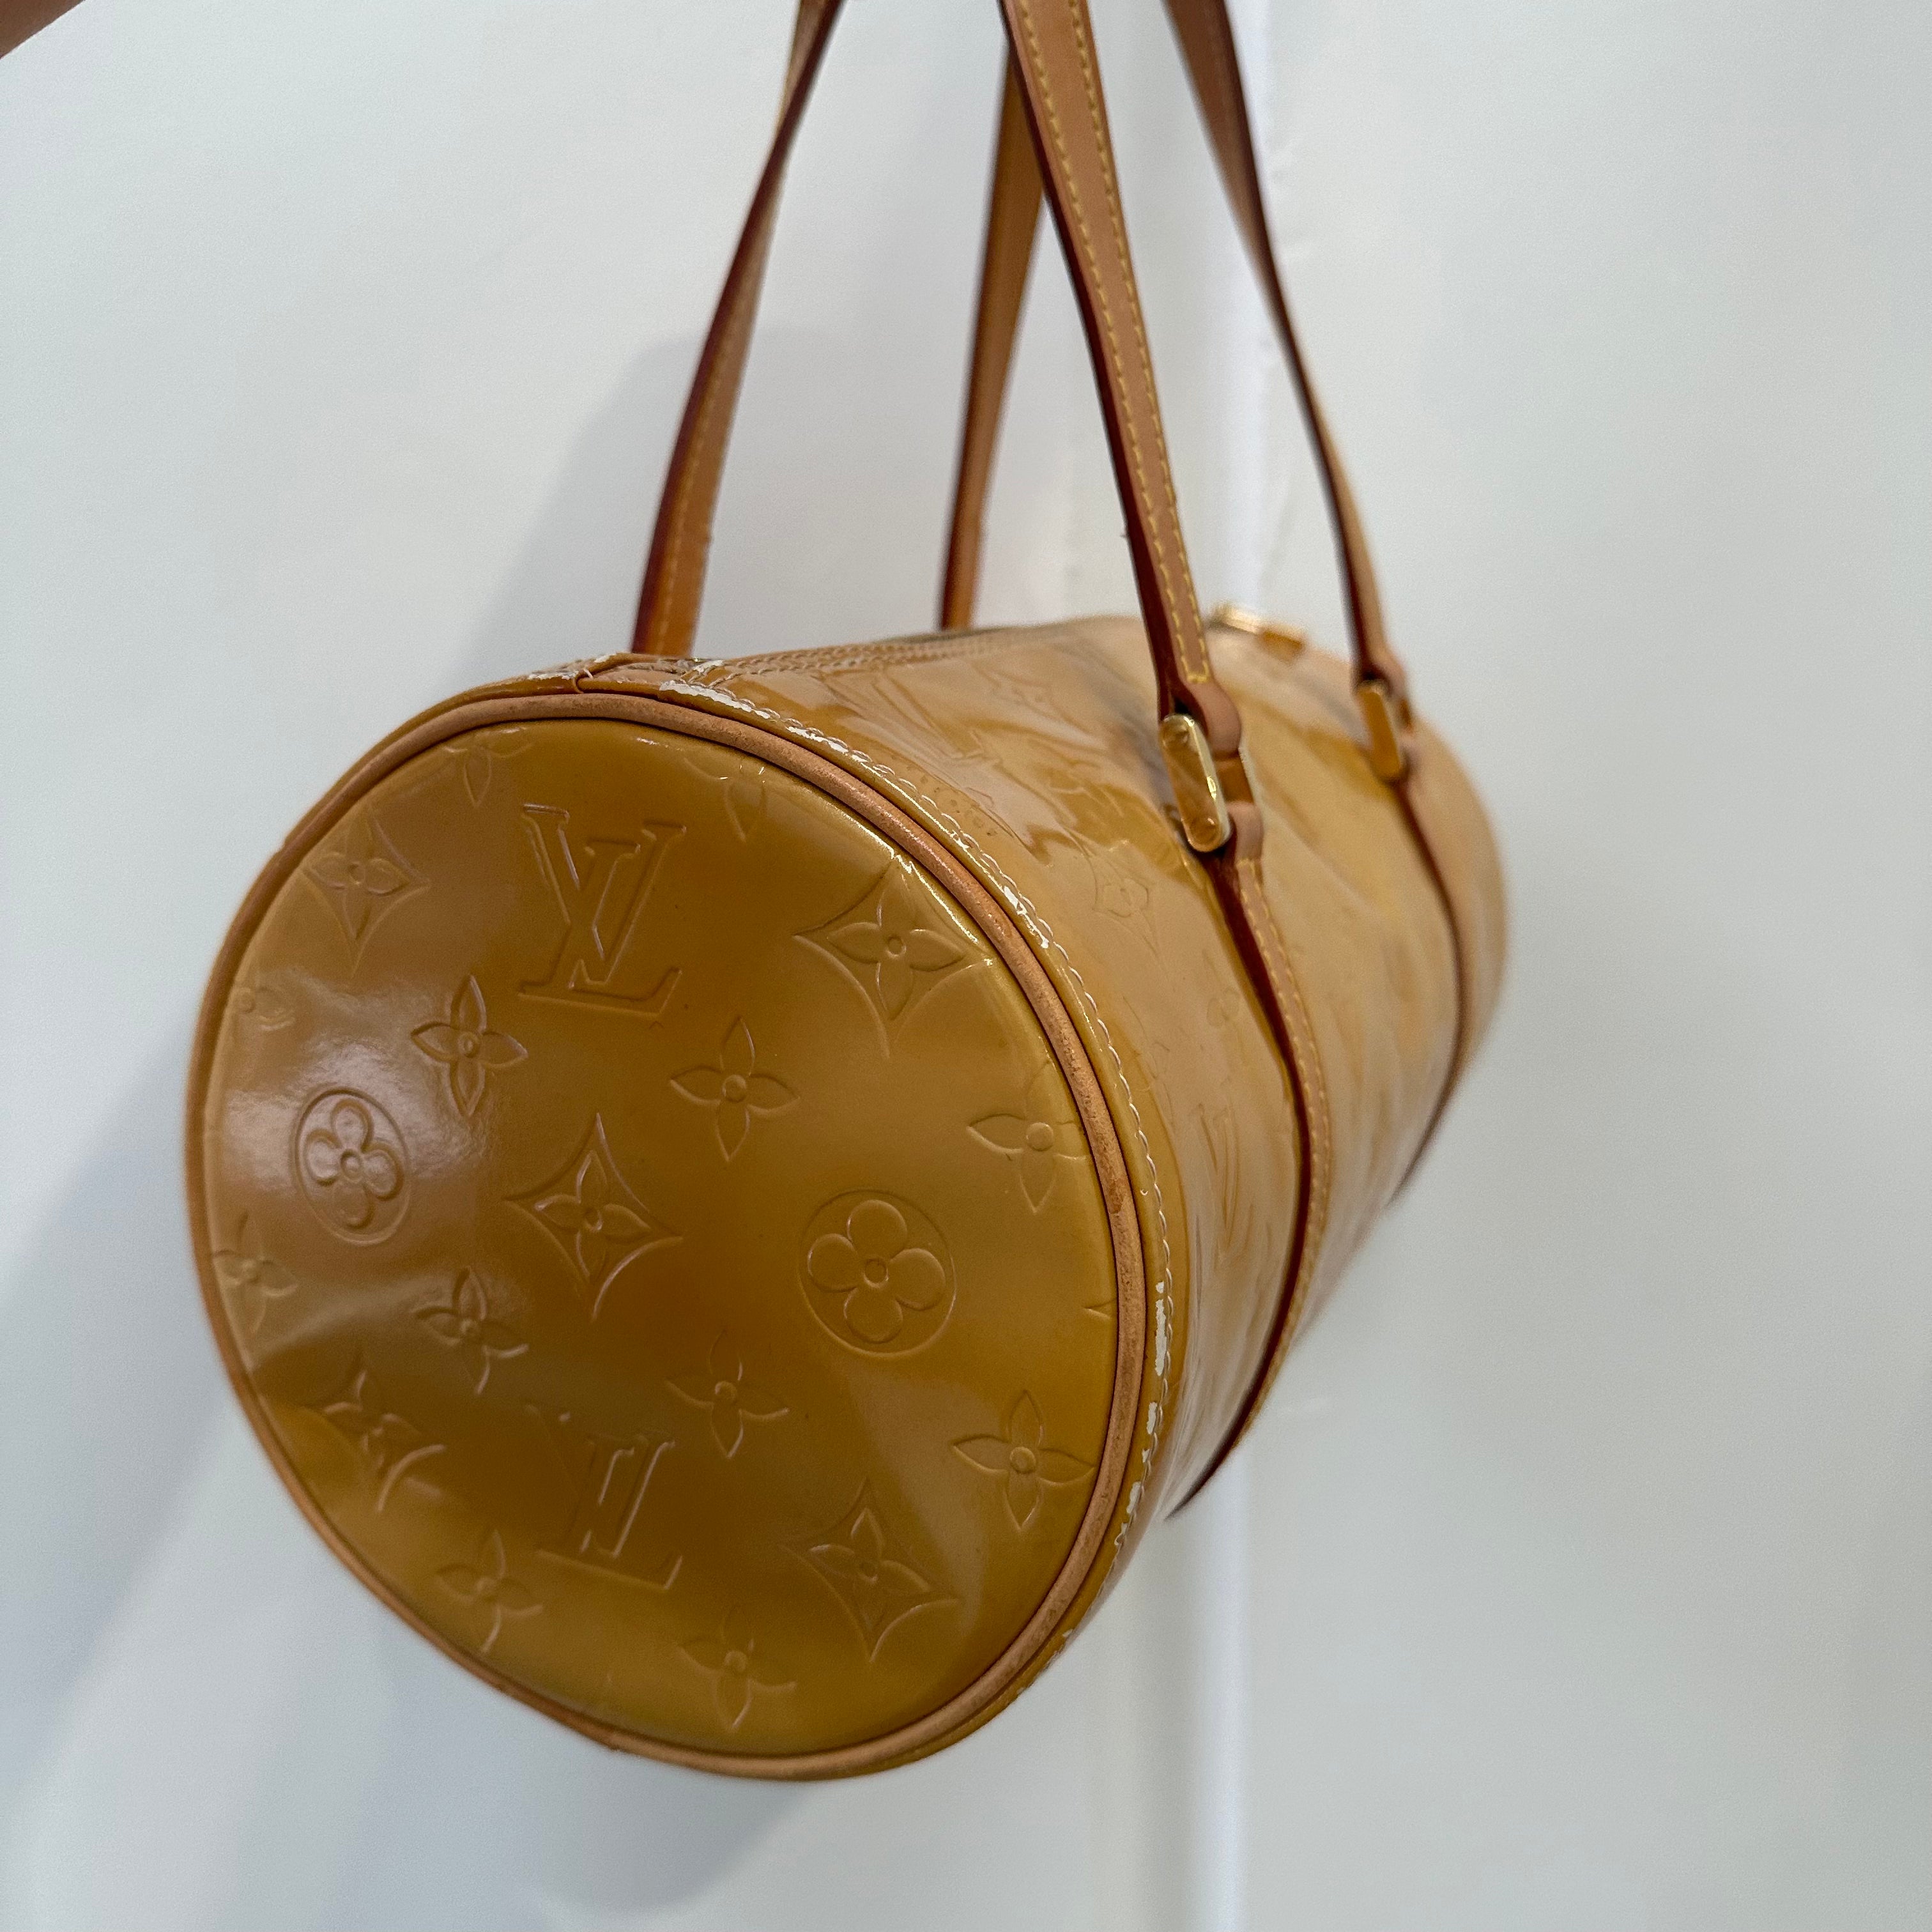 Louis Vuitton Yellow Vernis Papillon Hand Bag 12in L x 6in D